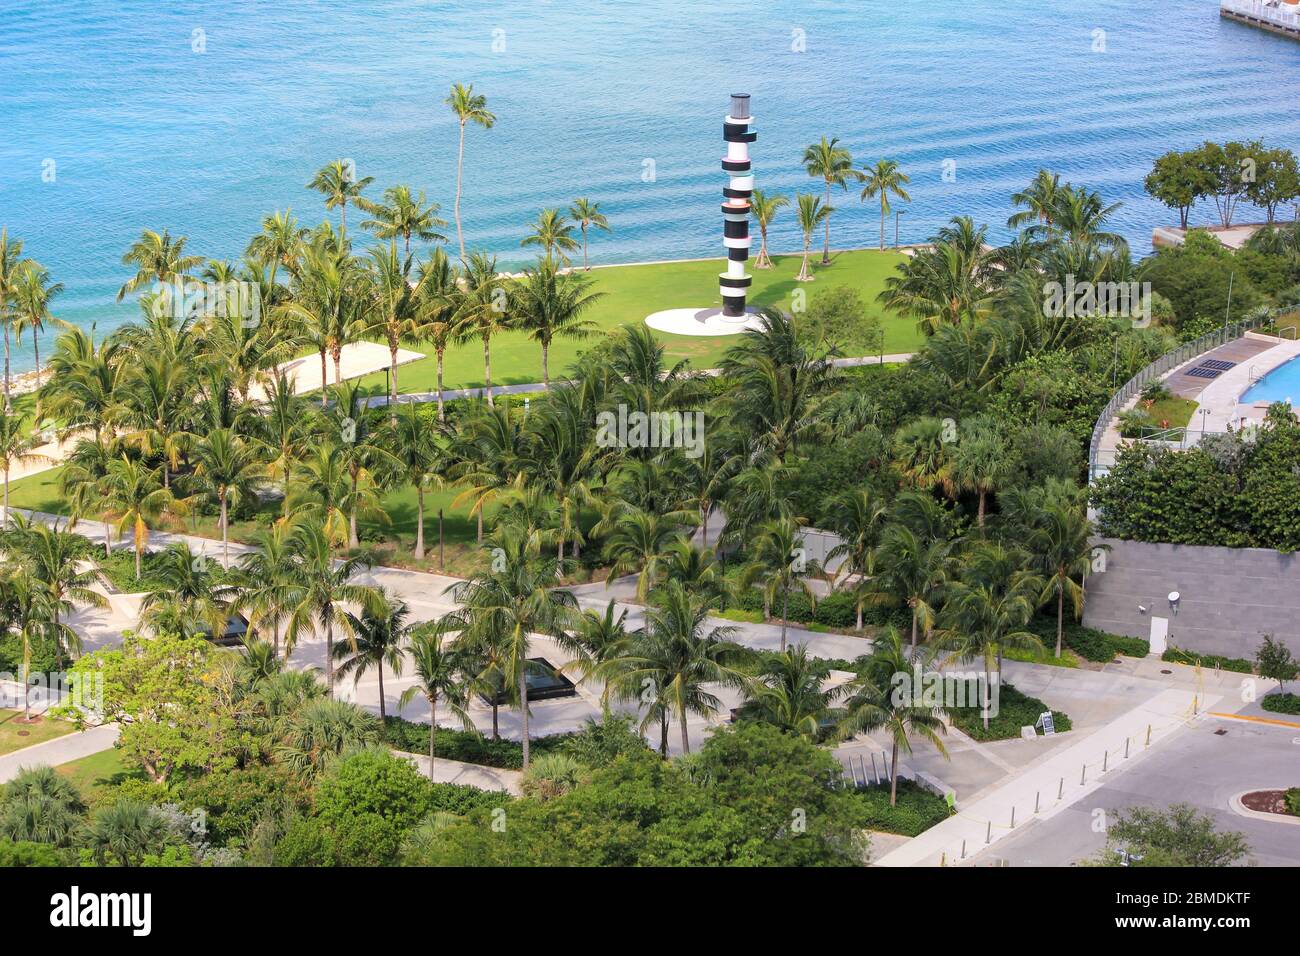 Miami Beach, Florida south pointe park closed on weekends due to coronoavirus rules flouted by visitors Stock Photo